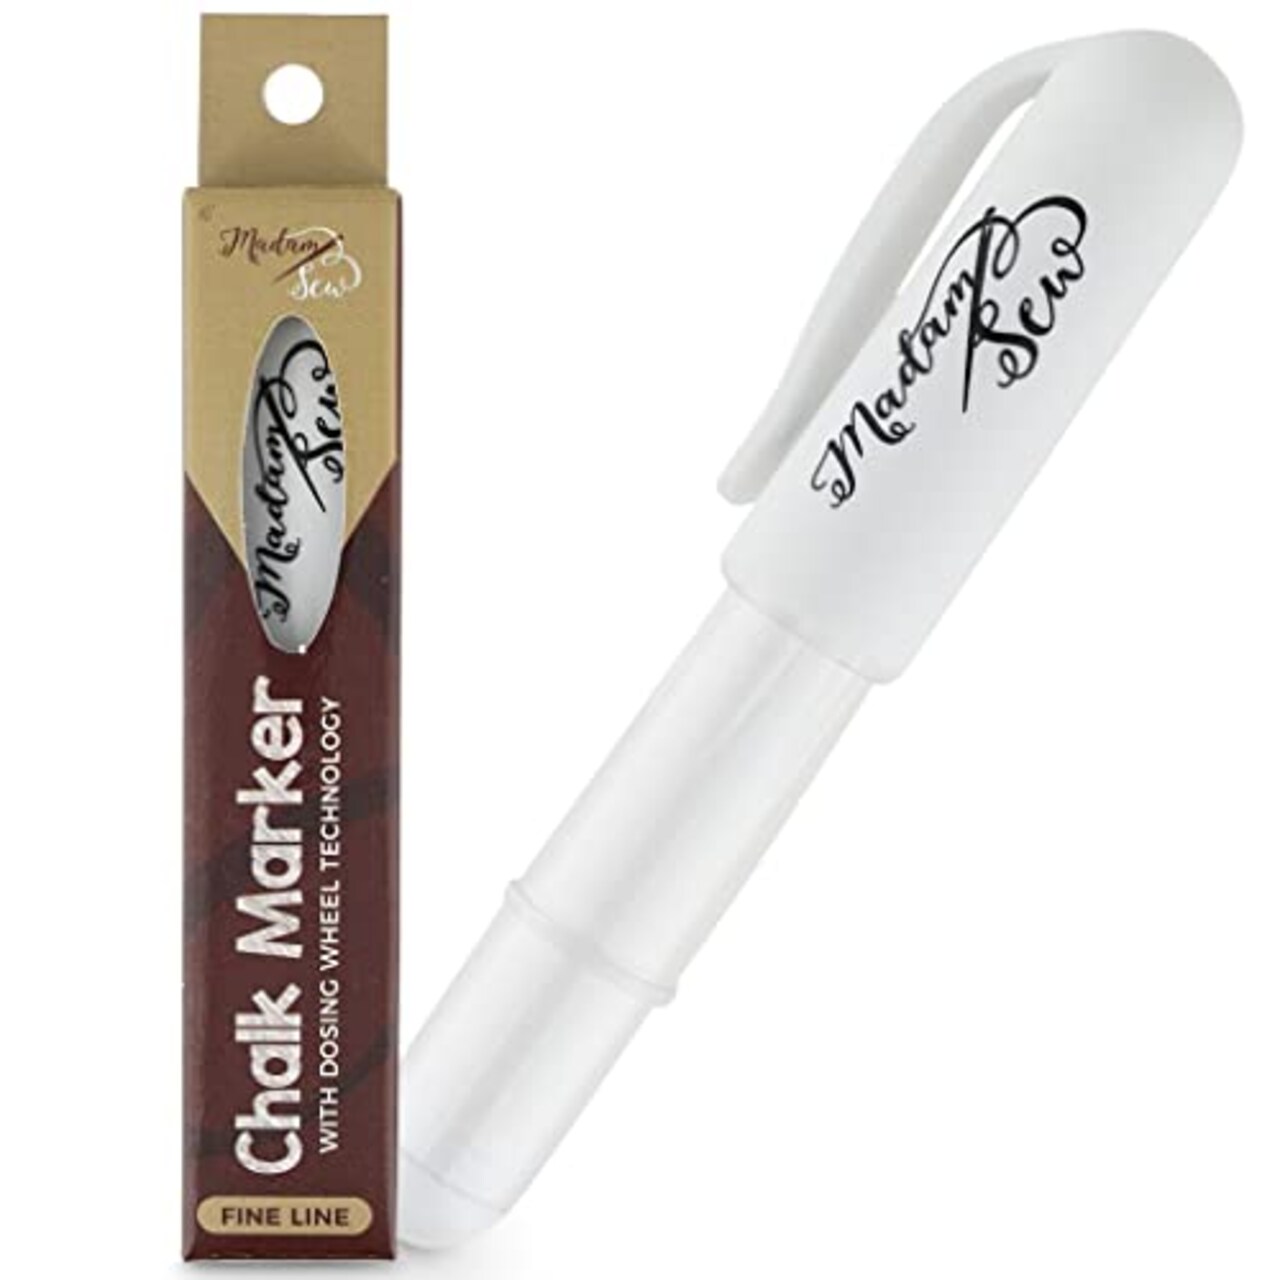 Madam Sew Chalk Fabric Marker for Sewing, Quilting & Crafting, White, Tailors Liner Pen Creates Consistent Erasable Lines with Dosing Wheel  Technology, Works on Cotton, Knit, Suede, and All Fabrics